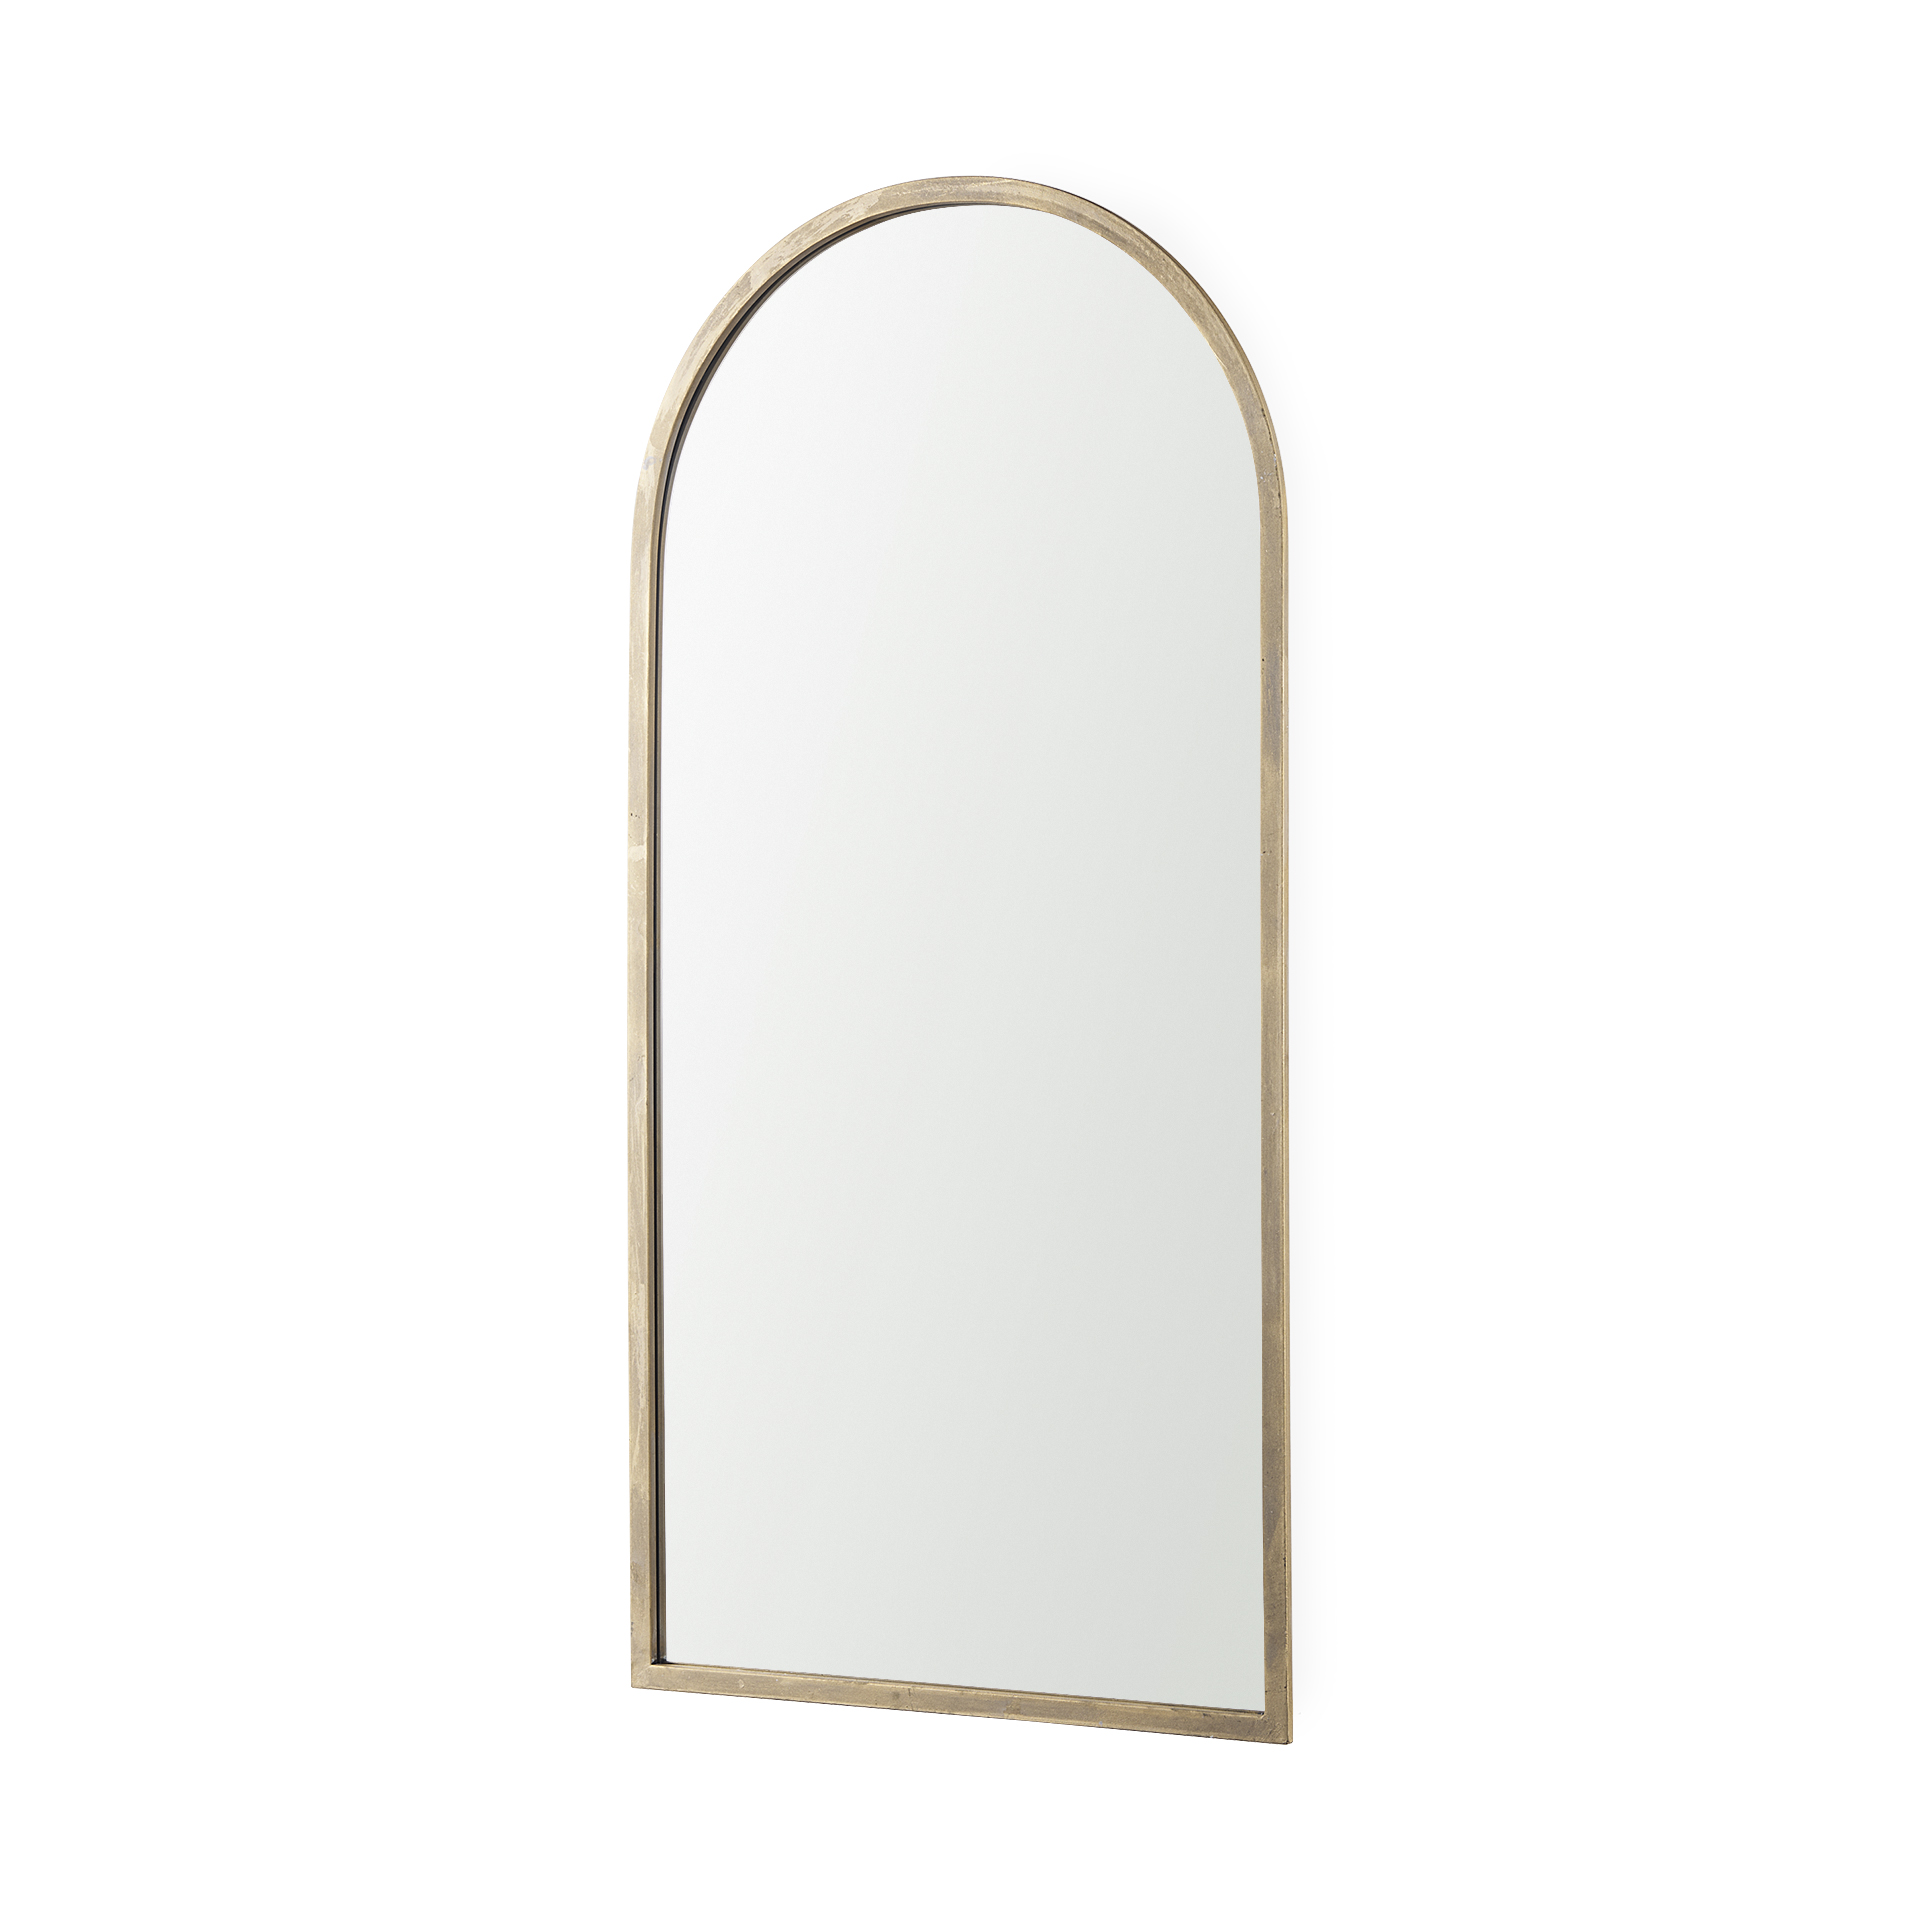 Gold Metal | Rounded Arch